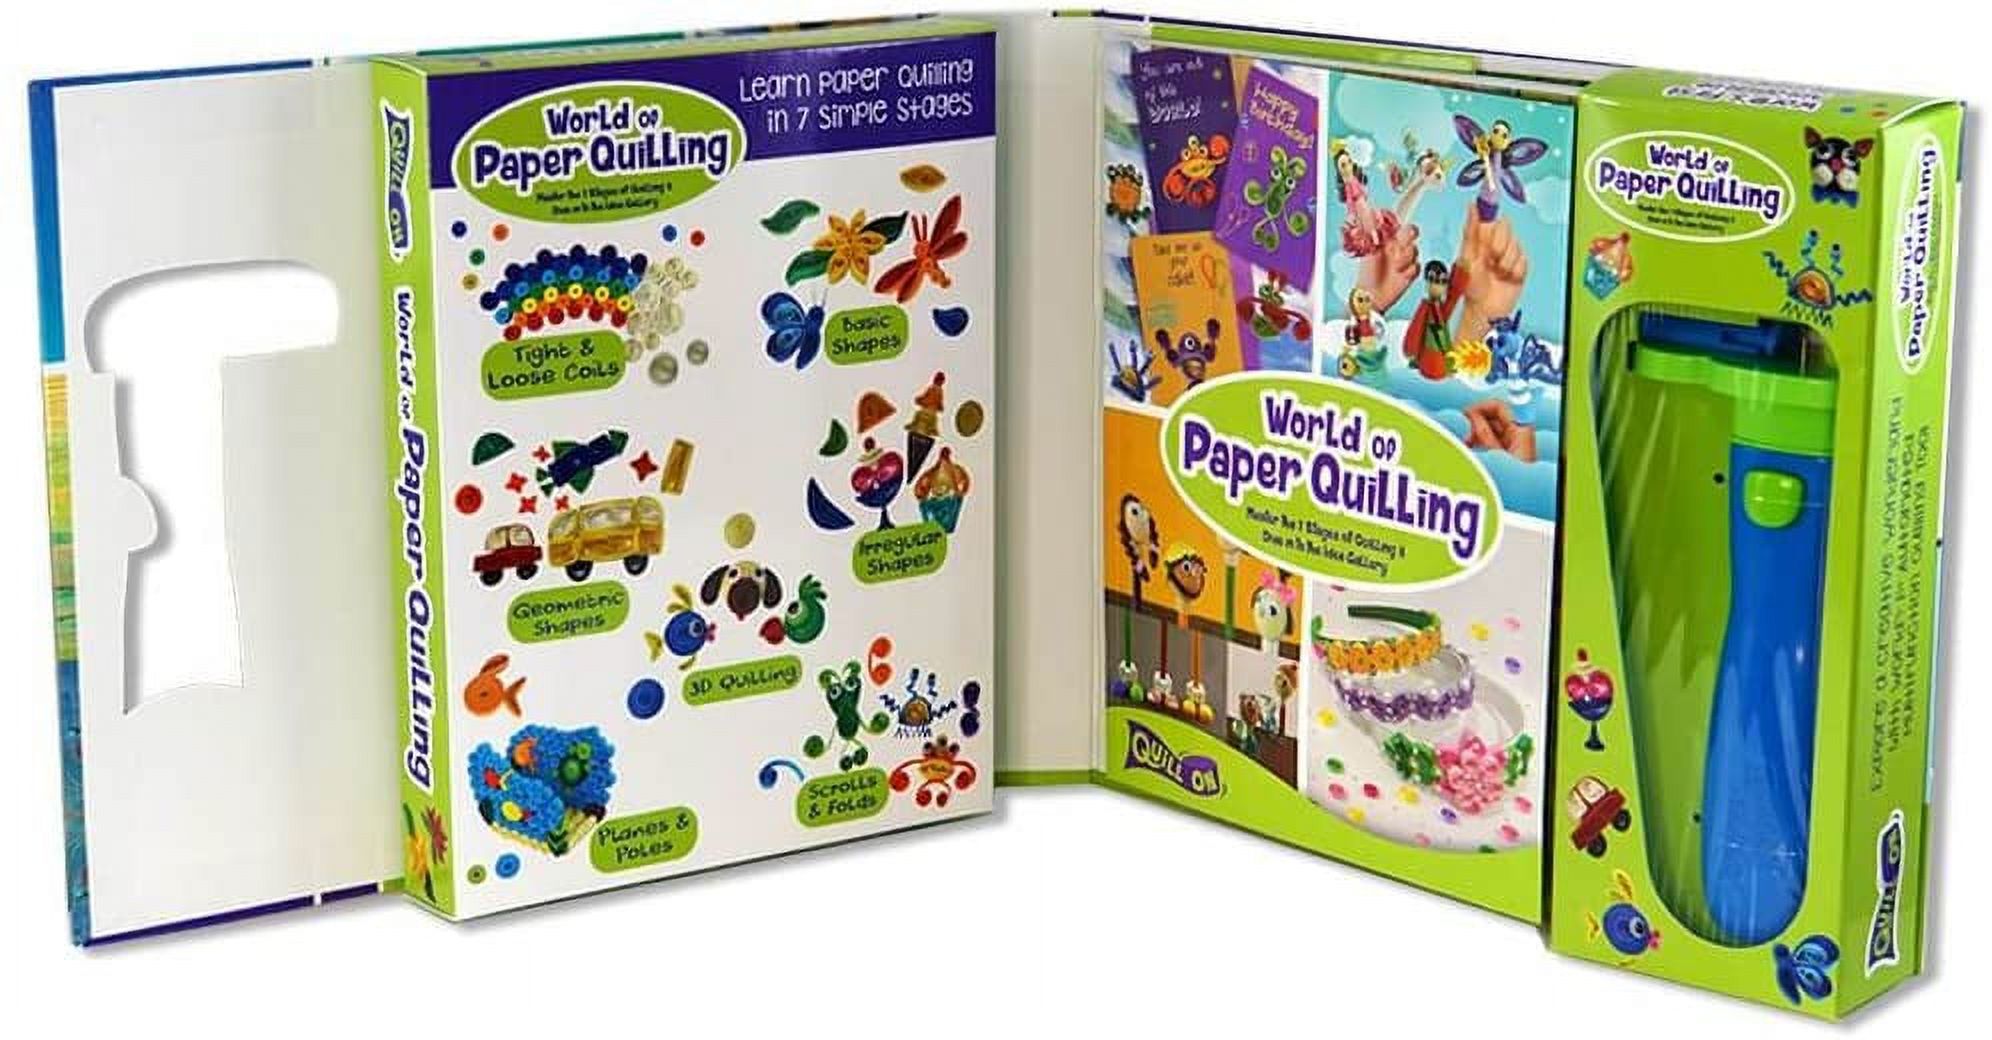 Quill On- Paper Quilling Kit for Beginners- Electric Quilling Tool